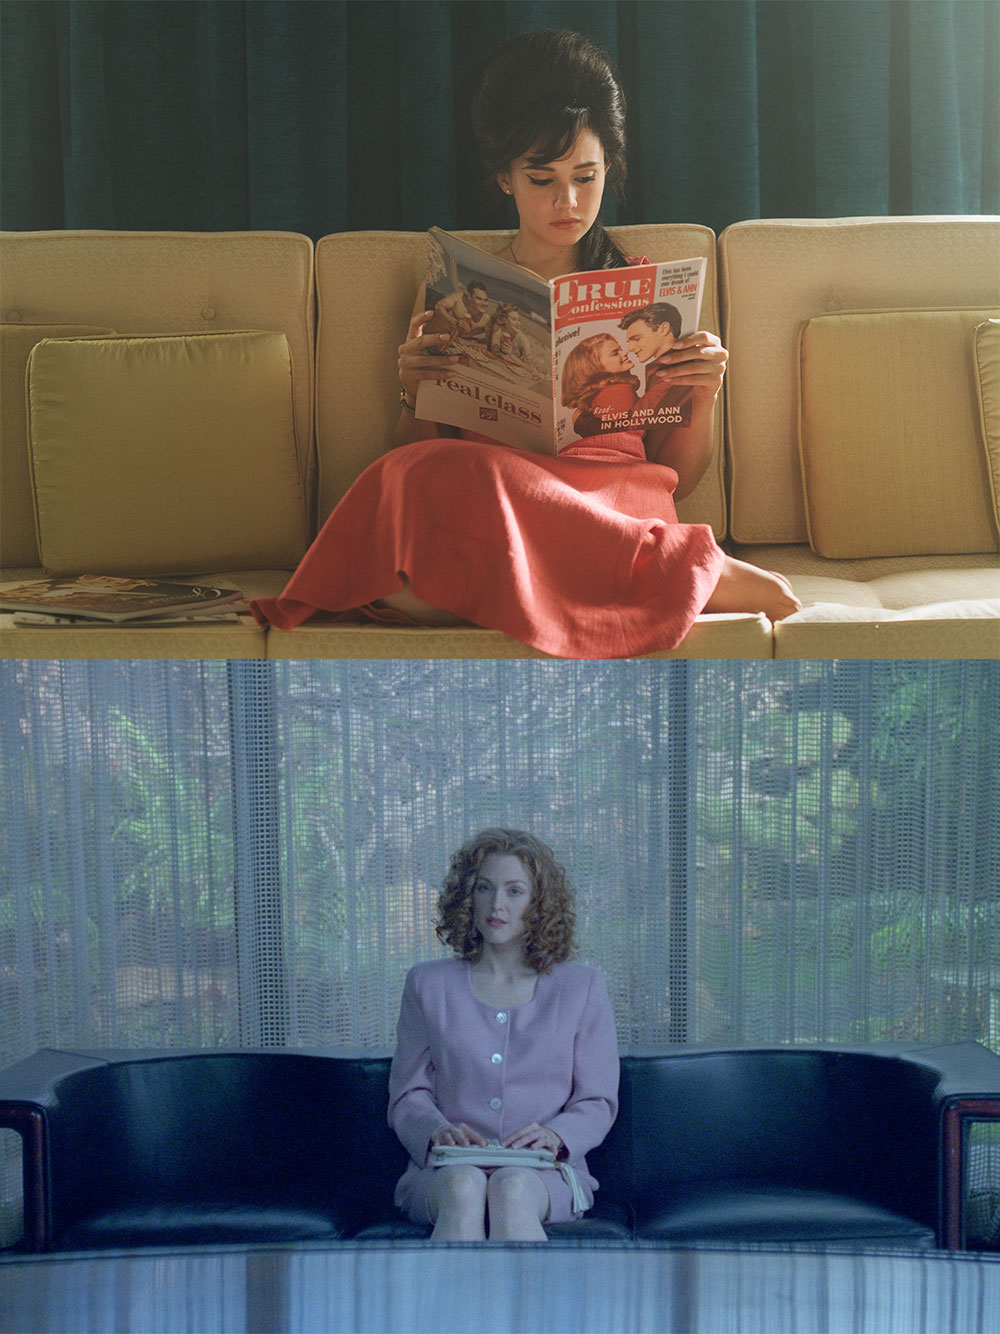 Top: Cailee Spaeny in Priscilla, photo by Sabrina Lantos courtesy of A24. Bottom: Julianne Moore in Safe.